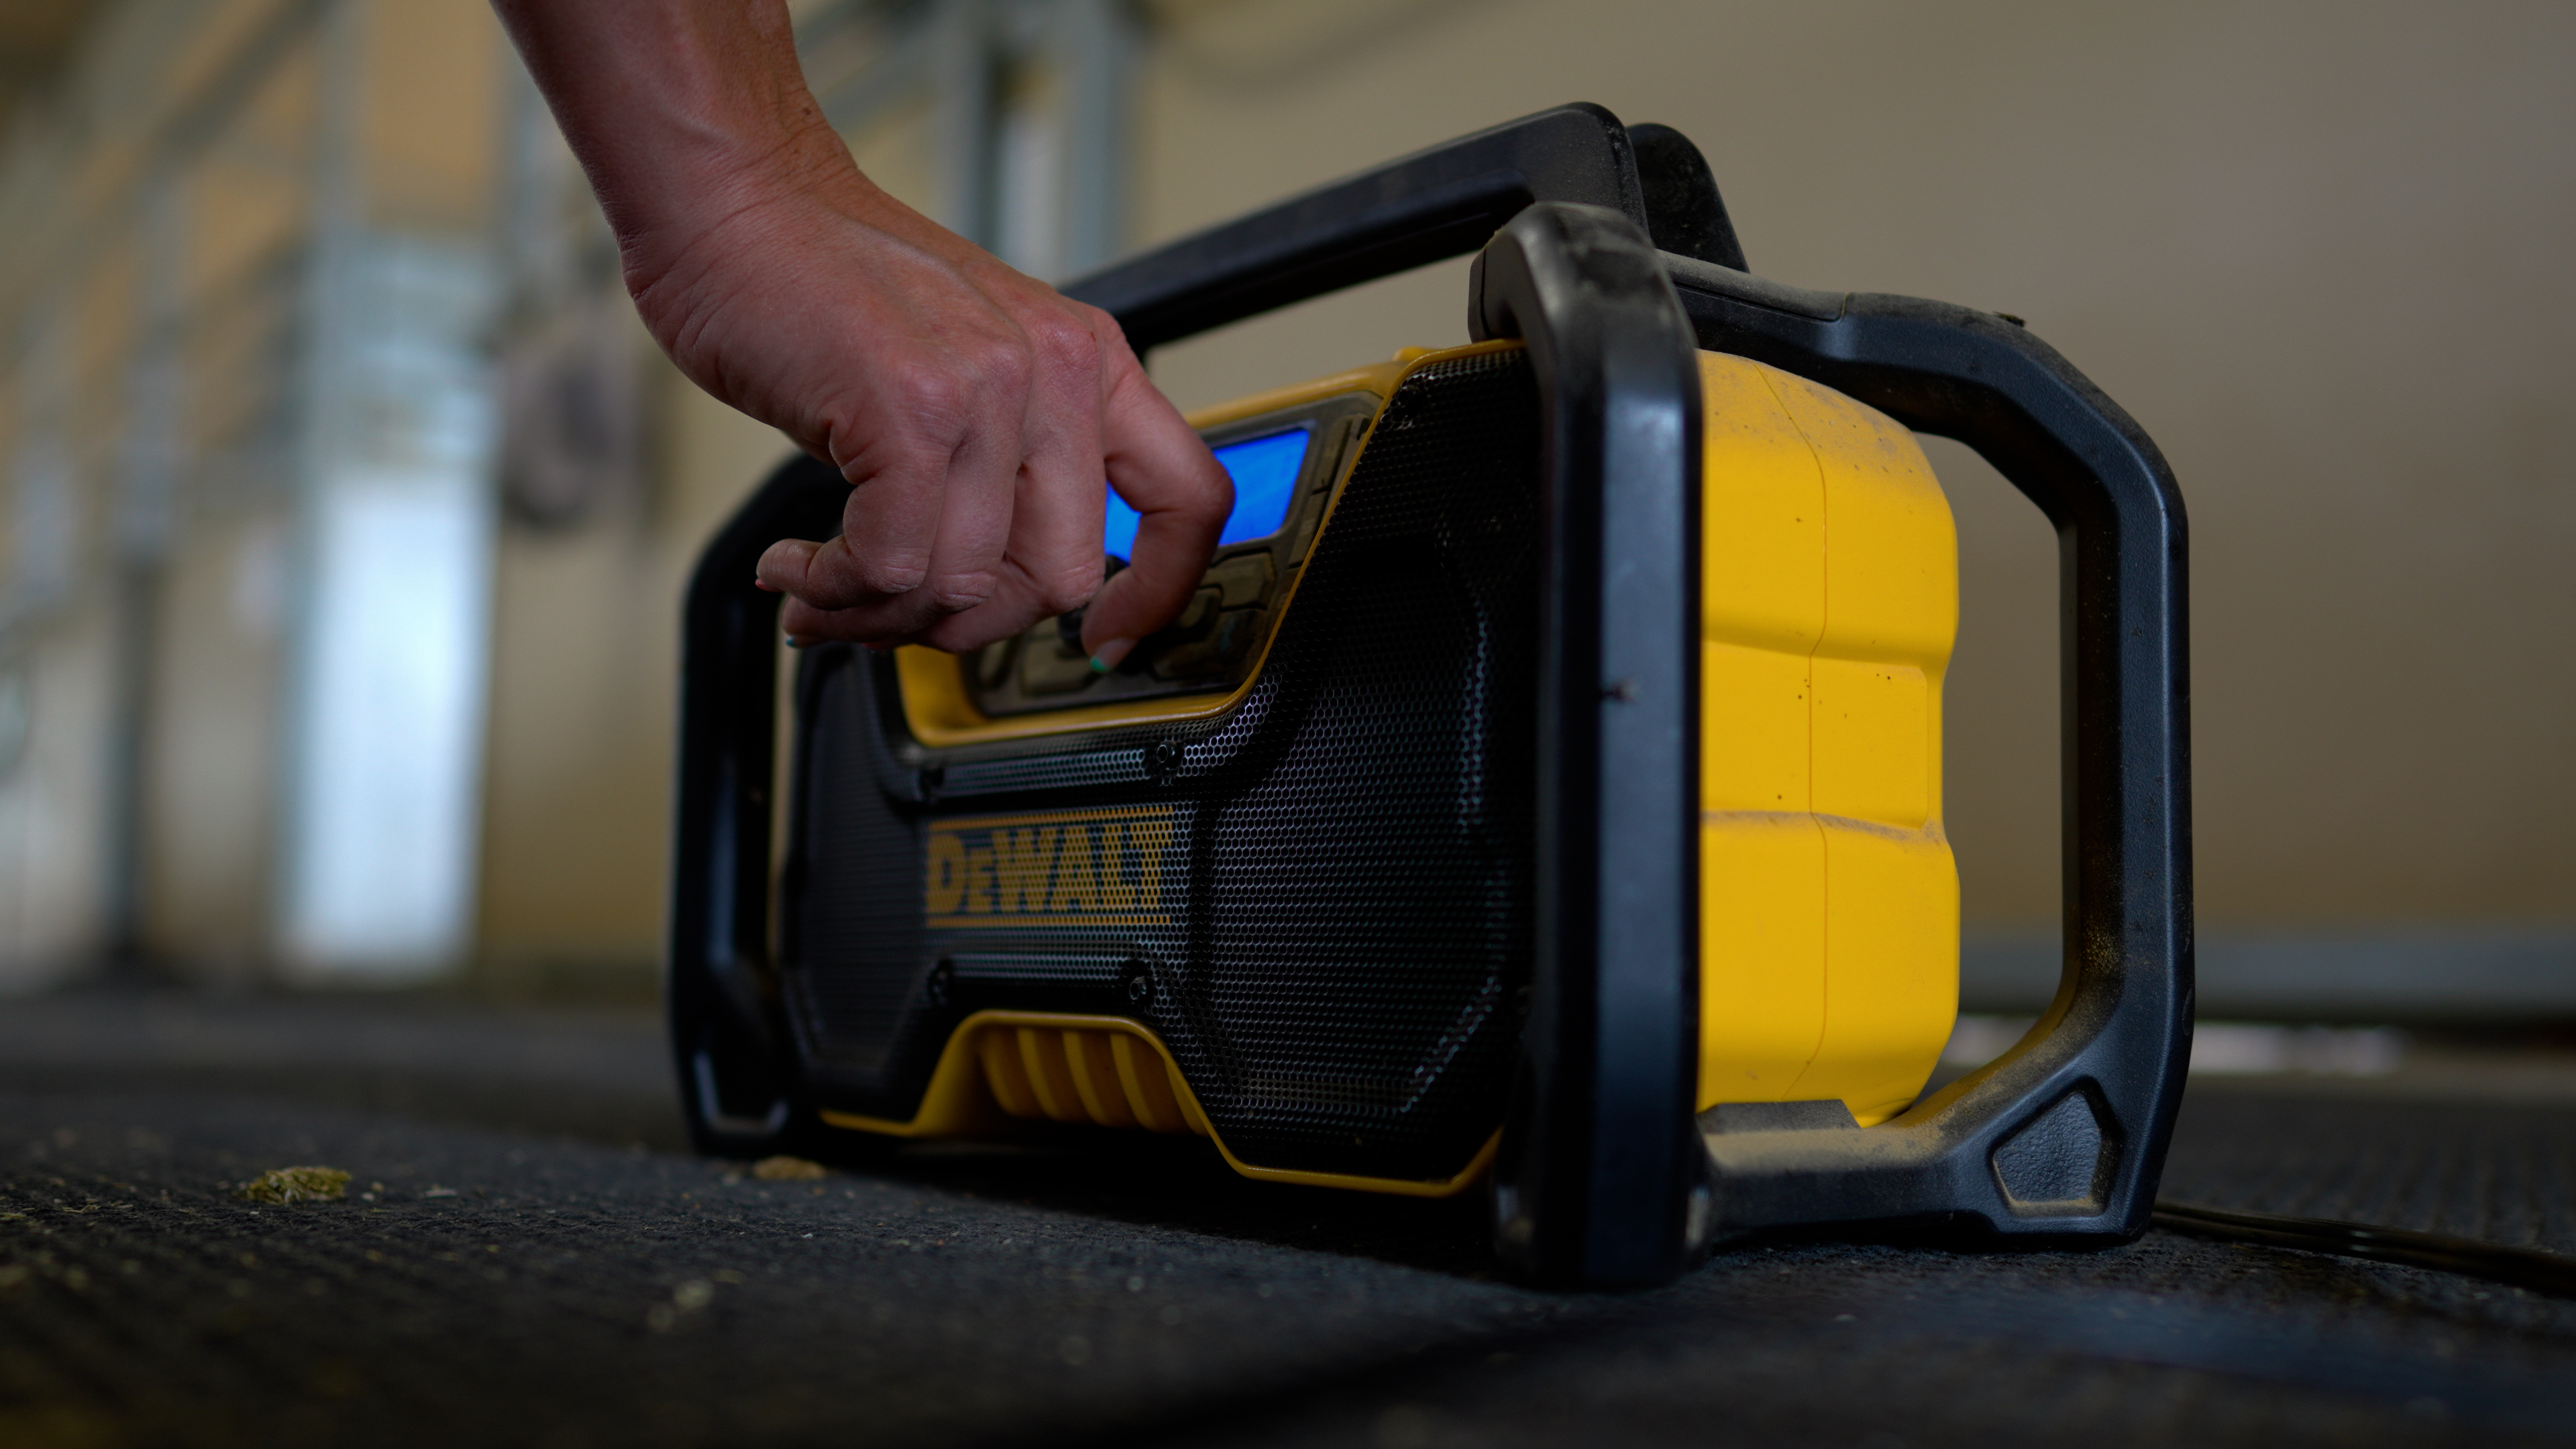 A hand adjusts the volume knob on a black and yellow DeWalt stereo.